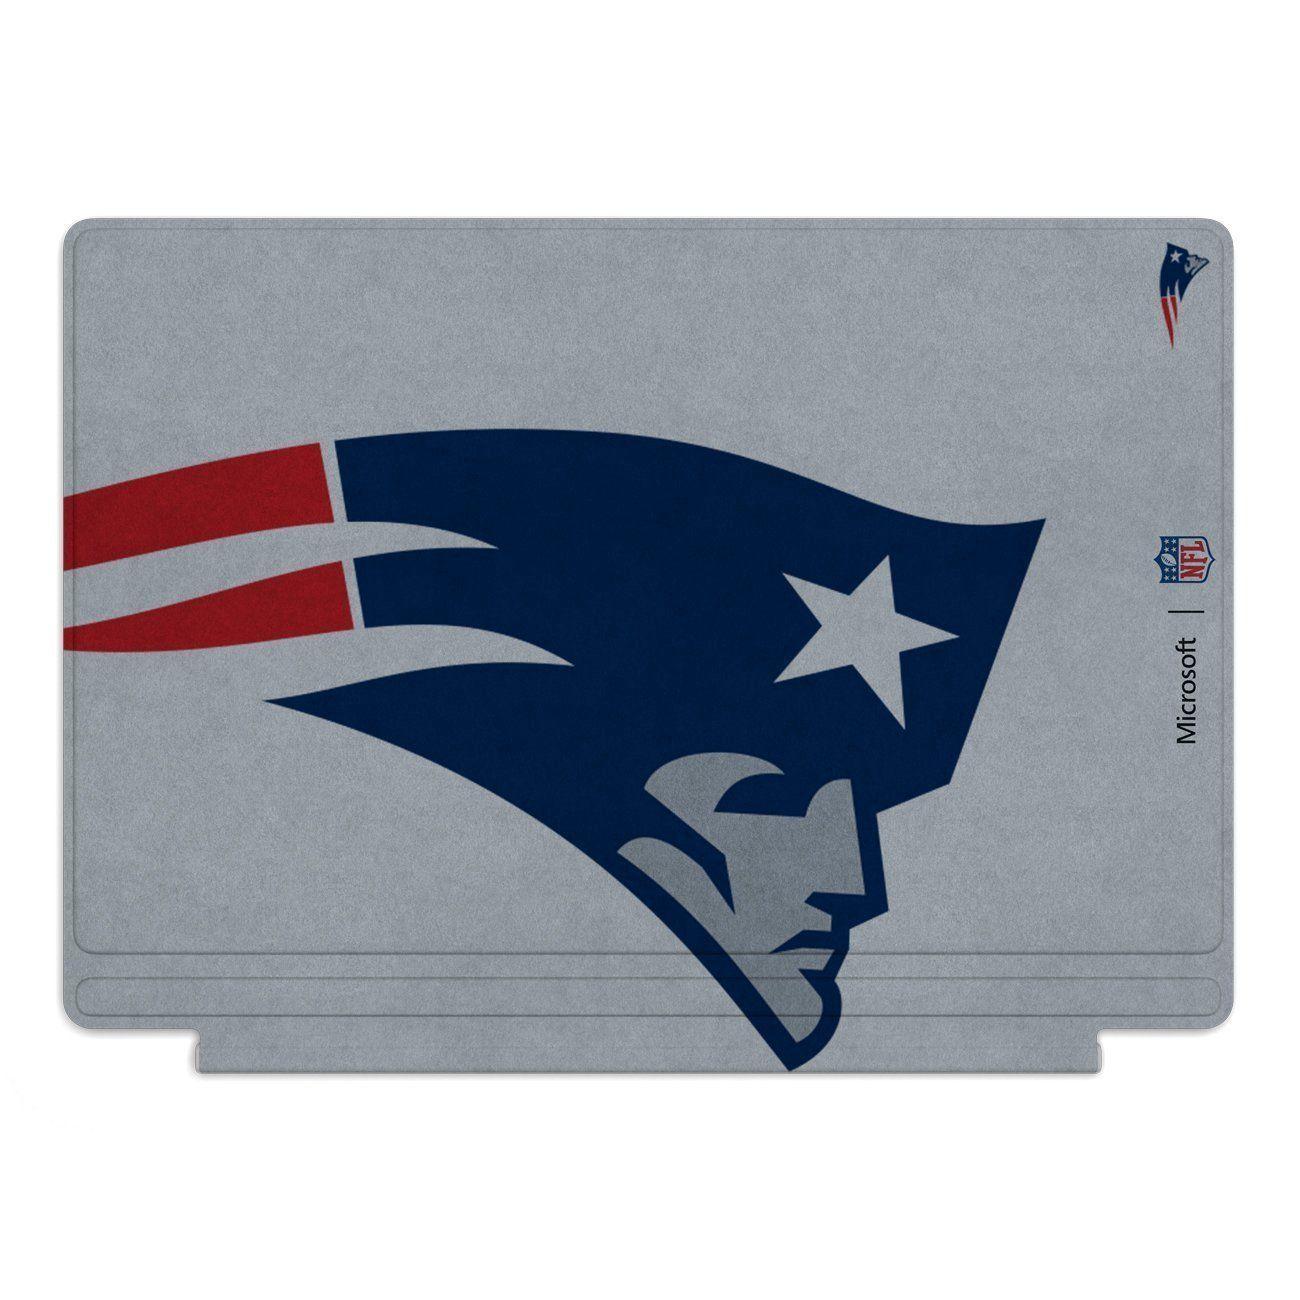 Surface Blue Logo - Amazon.com: Microsoft Surface Pro 4 Special Edition NFL Type Cover ...